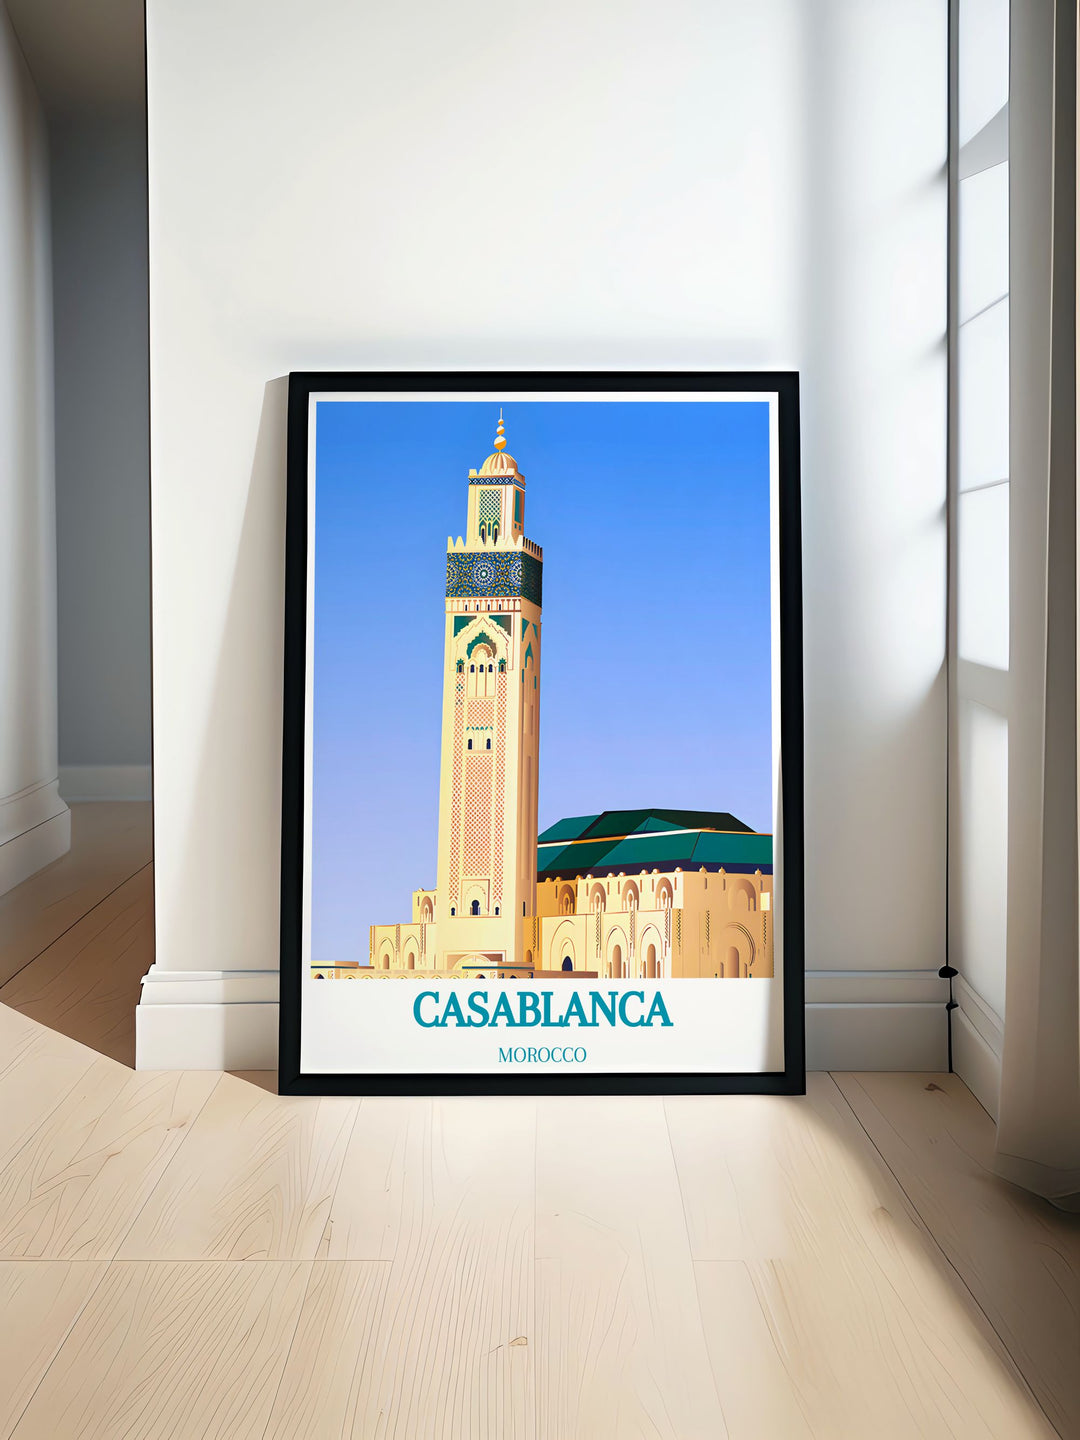 Detailed Casablanca art print capturing the bustling city life and iconic Moroccan architecture, perfect for any global art collection.